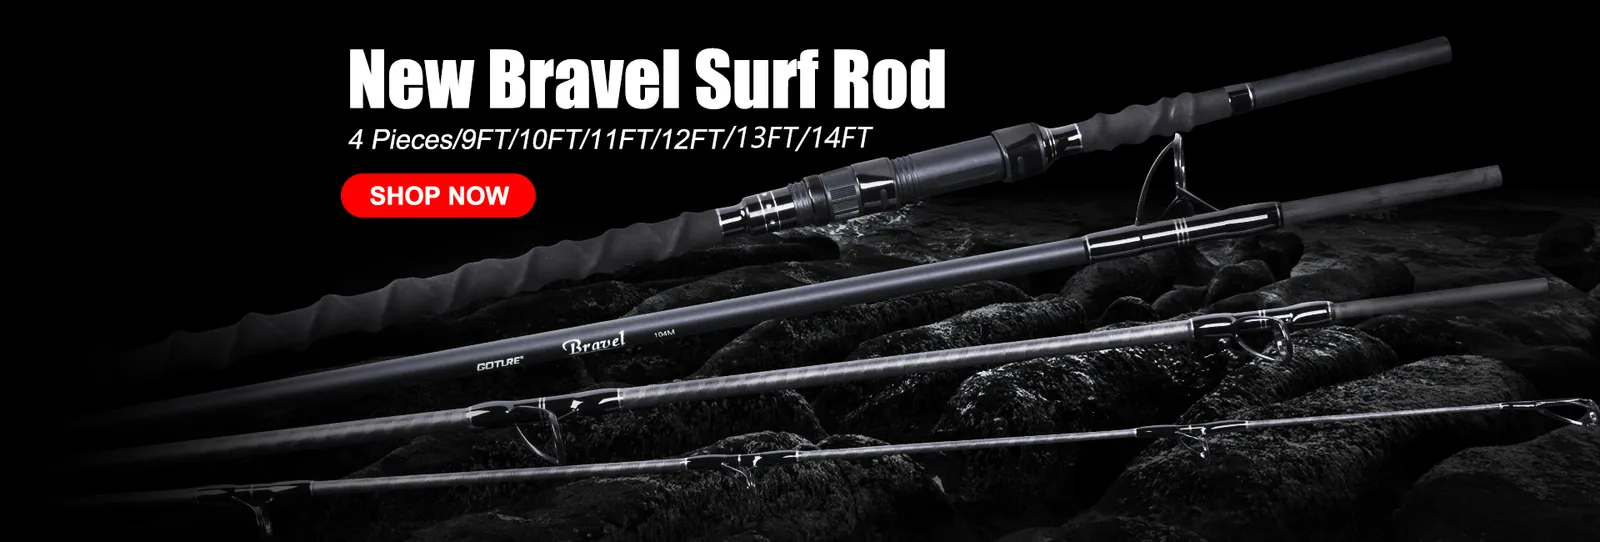 G Goture Bravel 4 Sections Surf Rod Carbon Fiber Fishing Pole For Boat For  Sea Bass, Trout Casting, And Travel Available In 9FT To 12FT Lengths 230619  From Bian06, $103.03